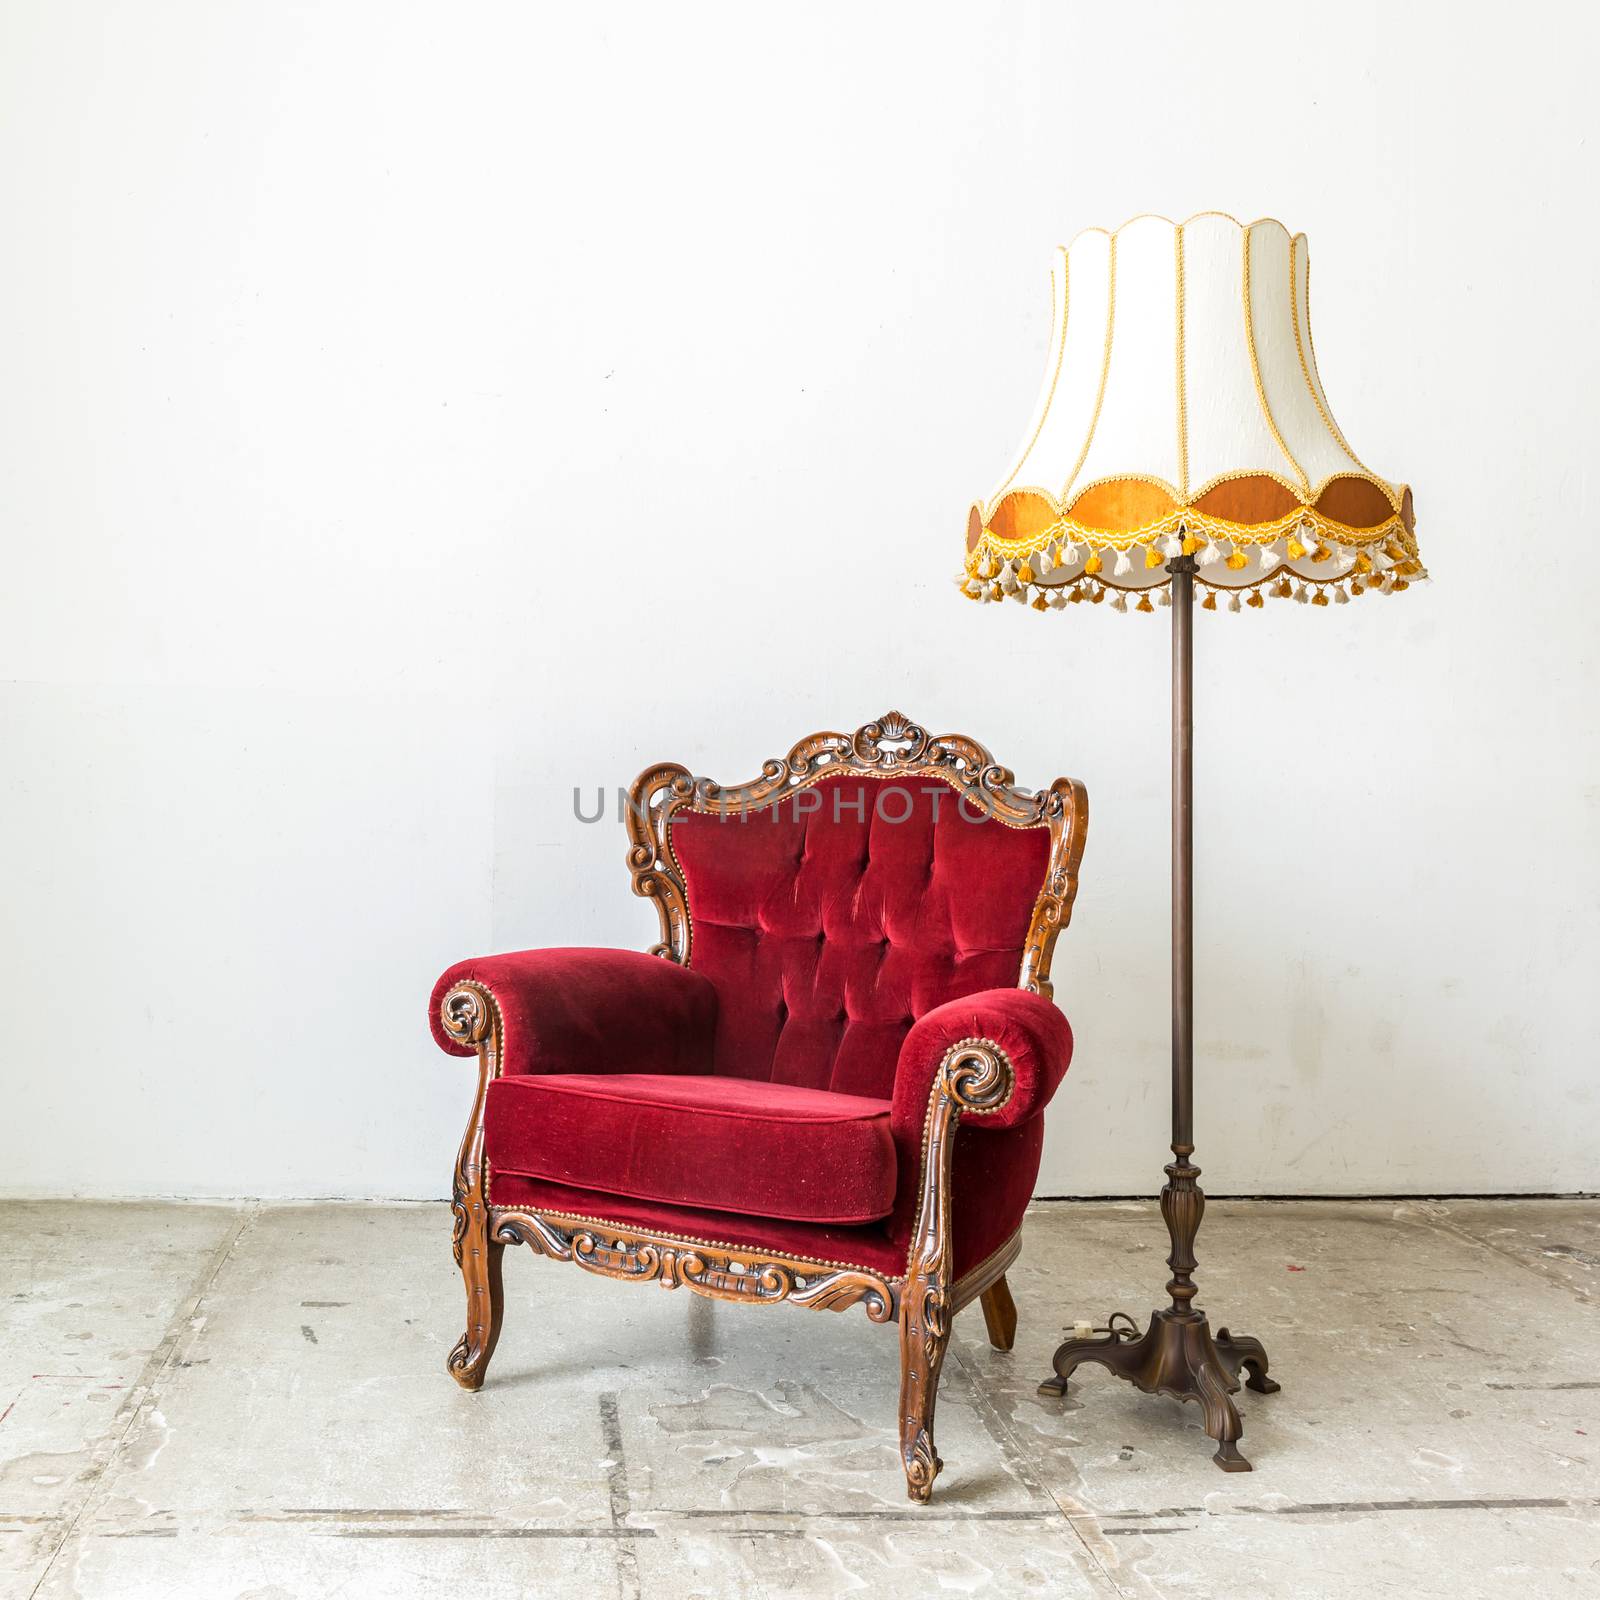 Red Retro Chair Lamp by vichie81